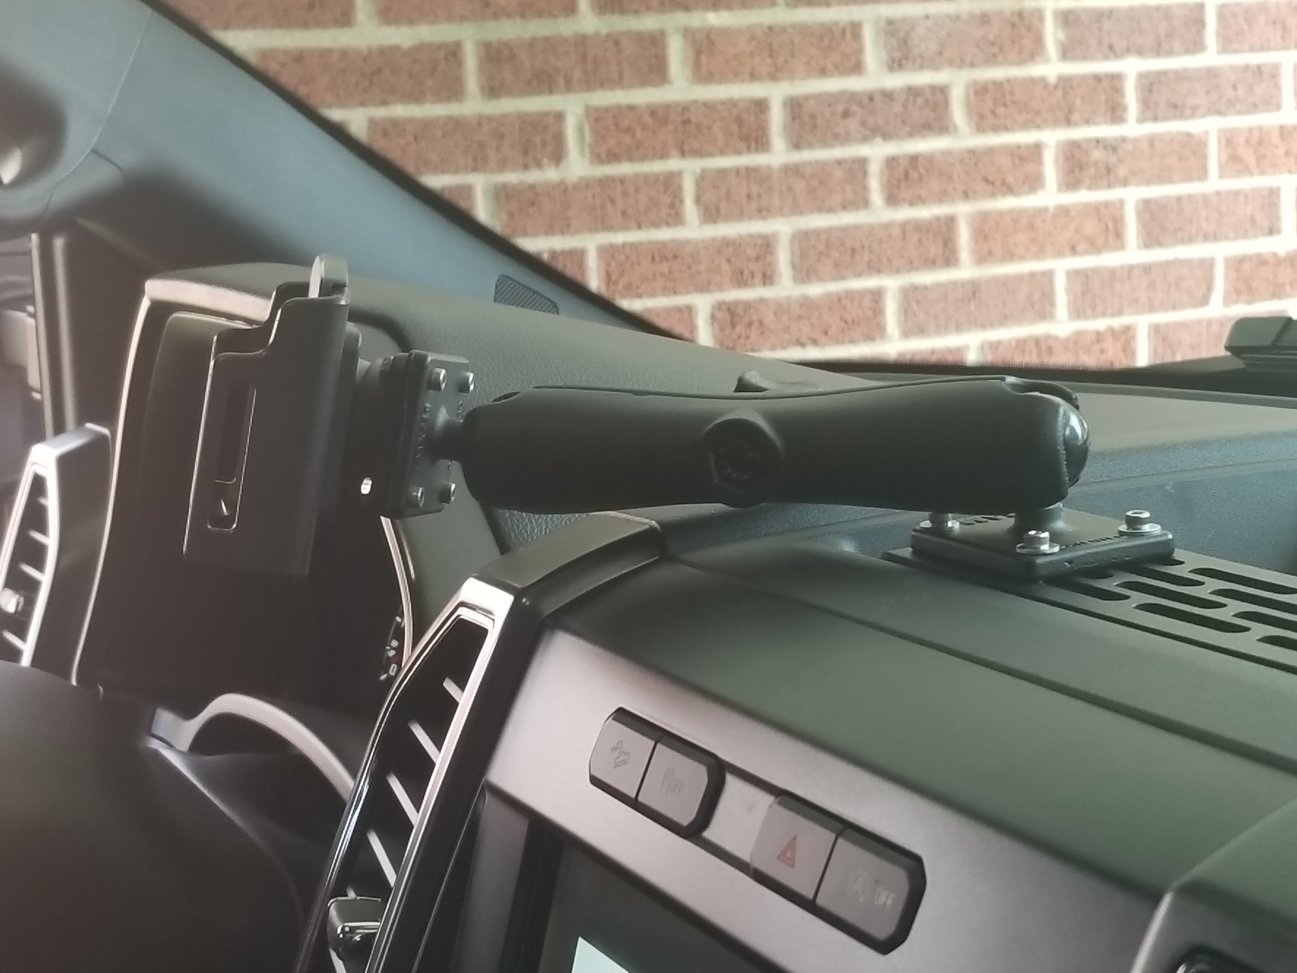 Best Cell Phone holder for the F150 - Page 31 - Ford F150 Forum